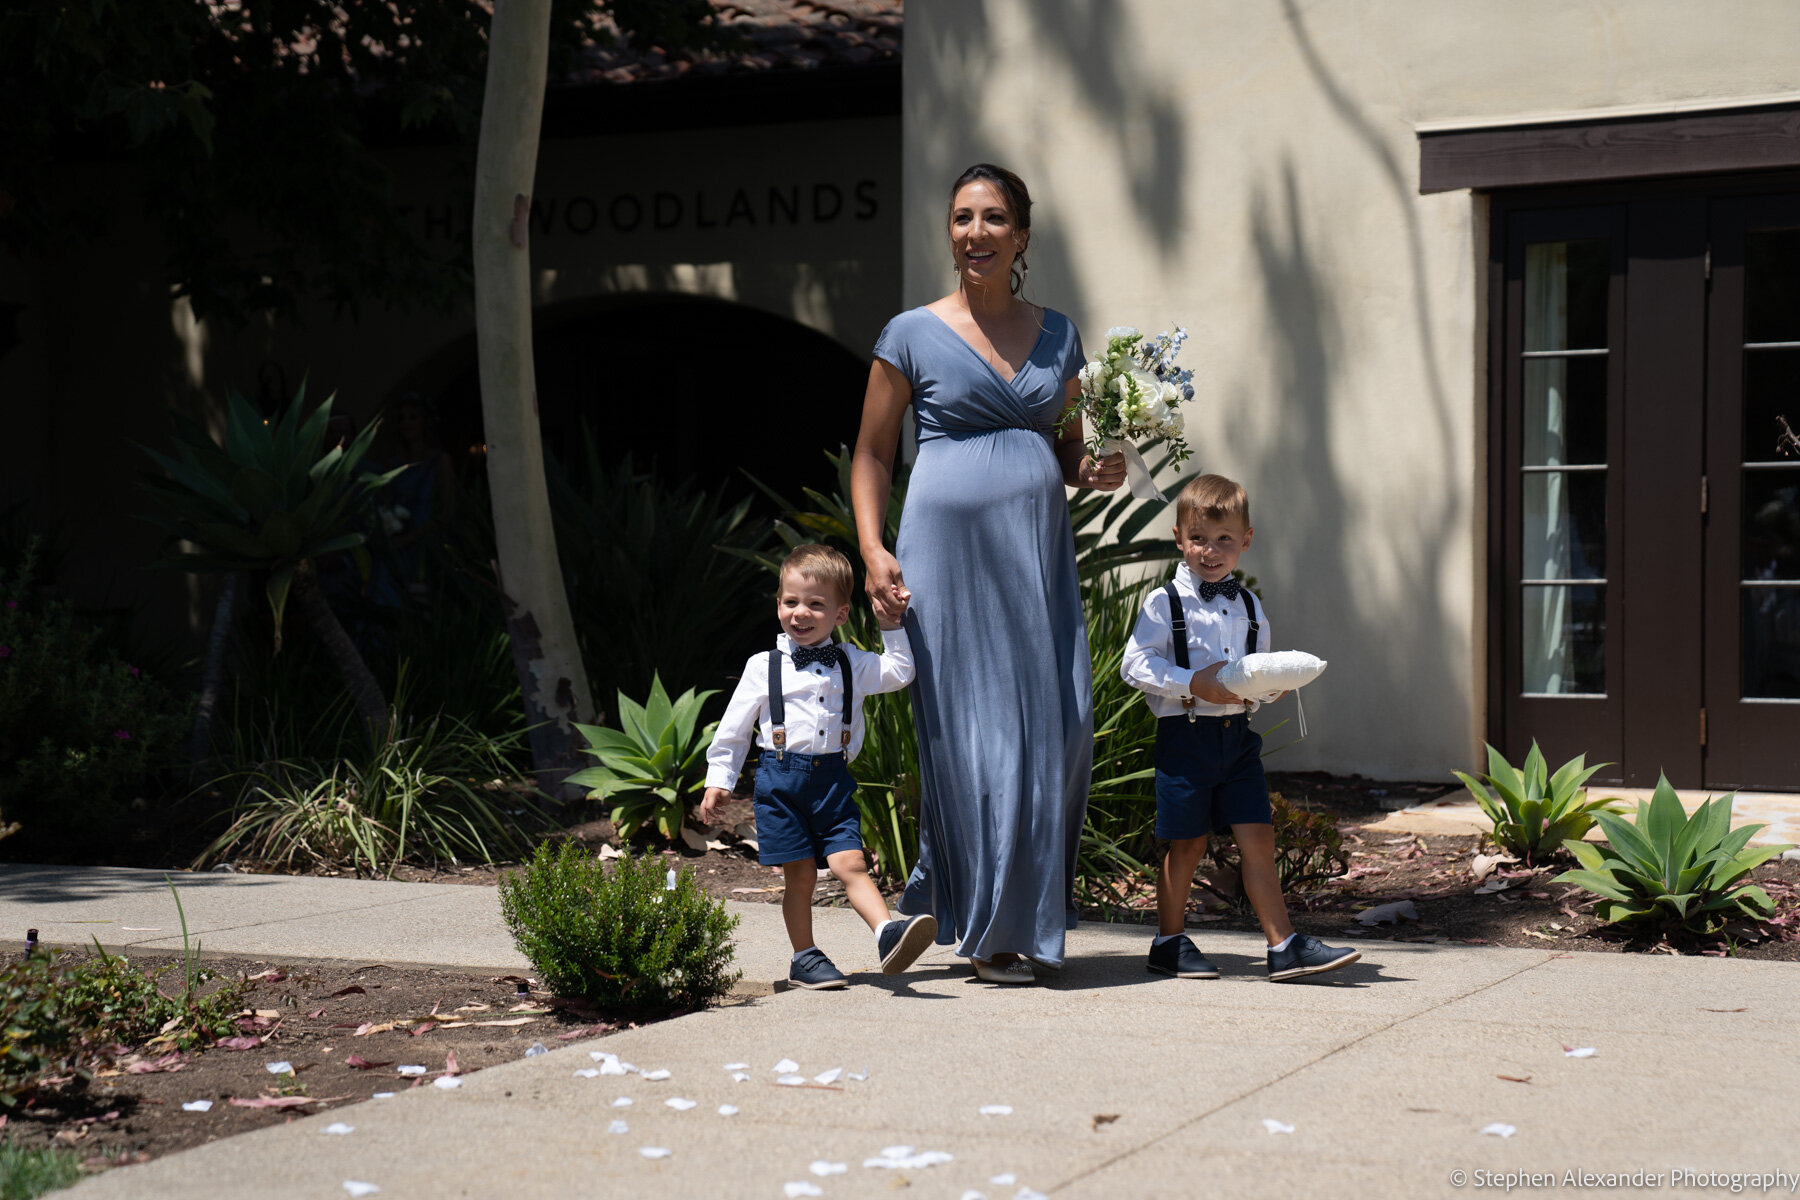 the ring-bearers were on point with some help from their mom.